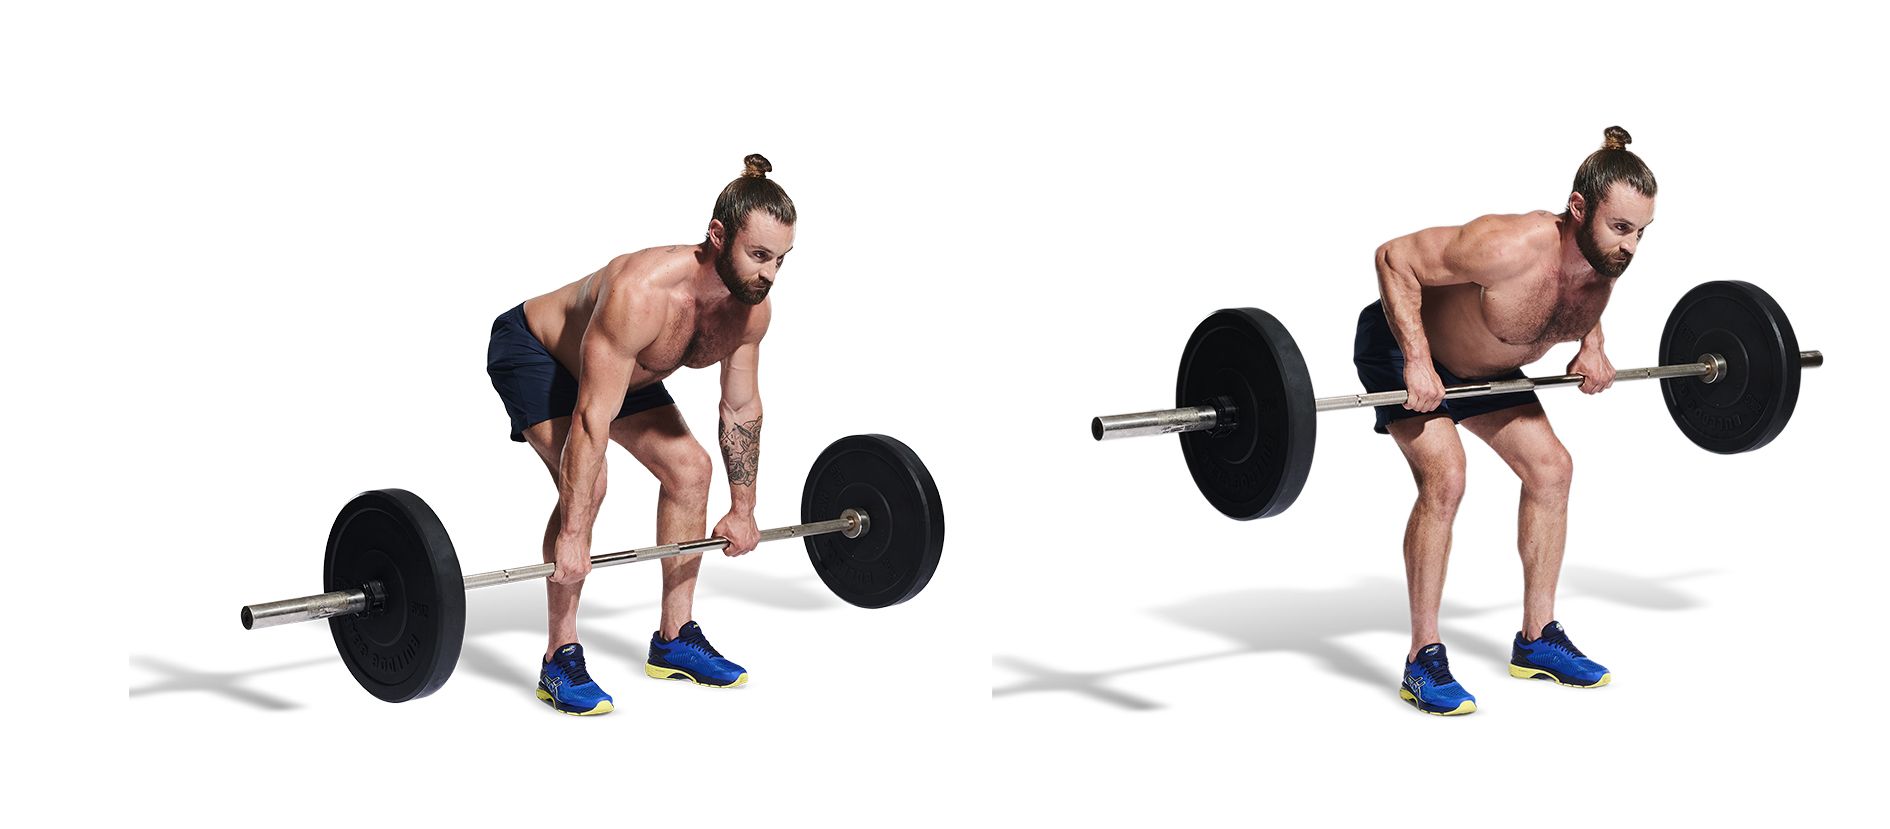 Full Body Barbell Workout [infographic]